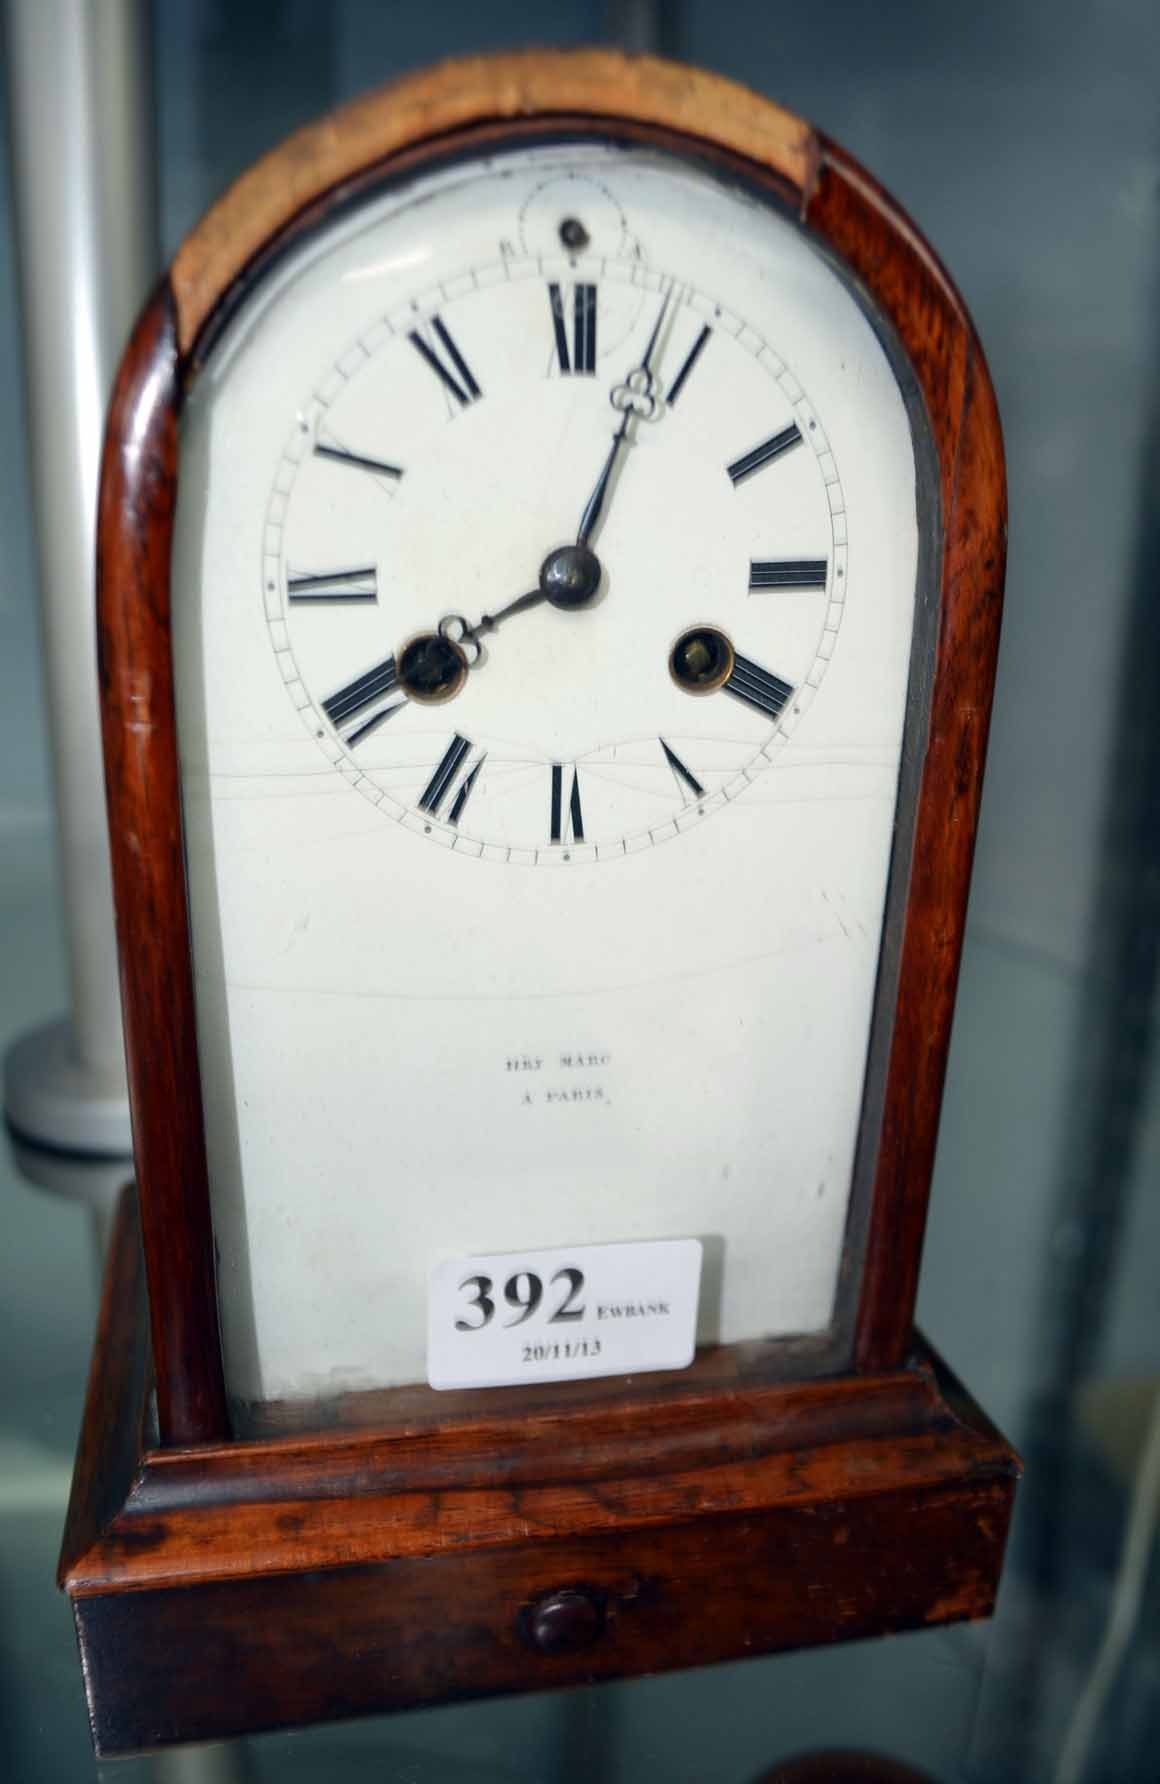 19th century rosewood French mantel clock by Henry Marc (Paris)